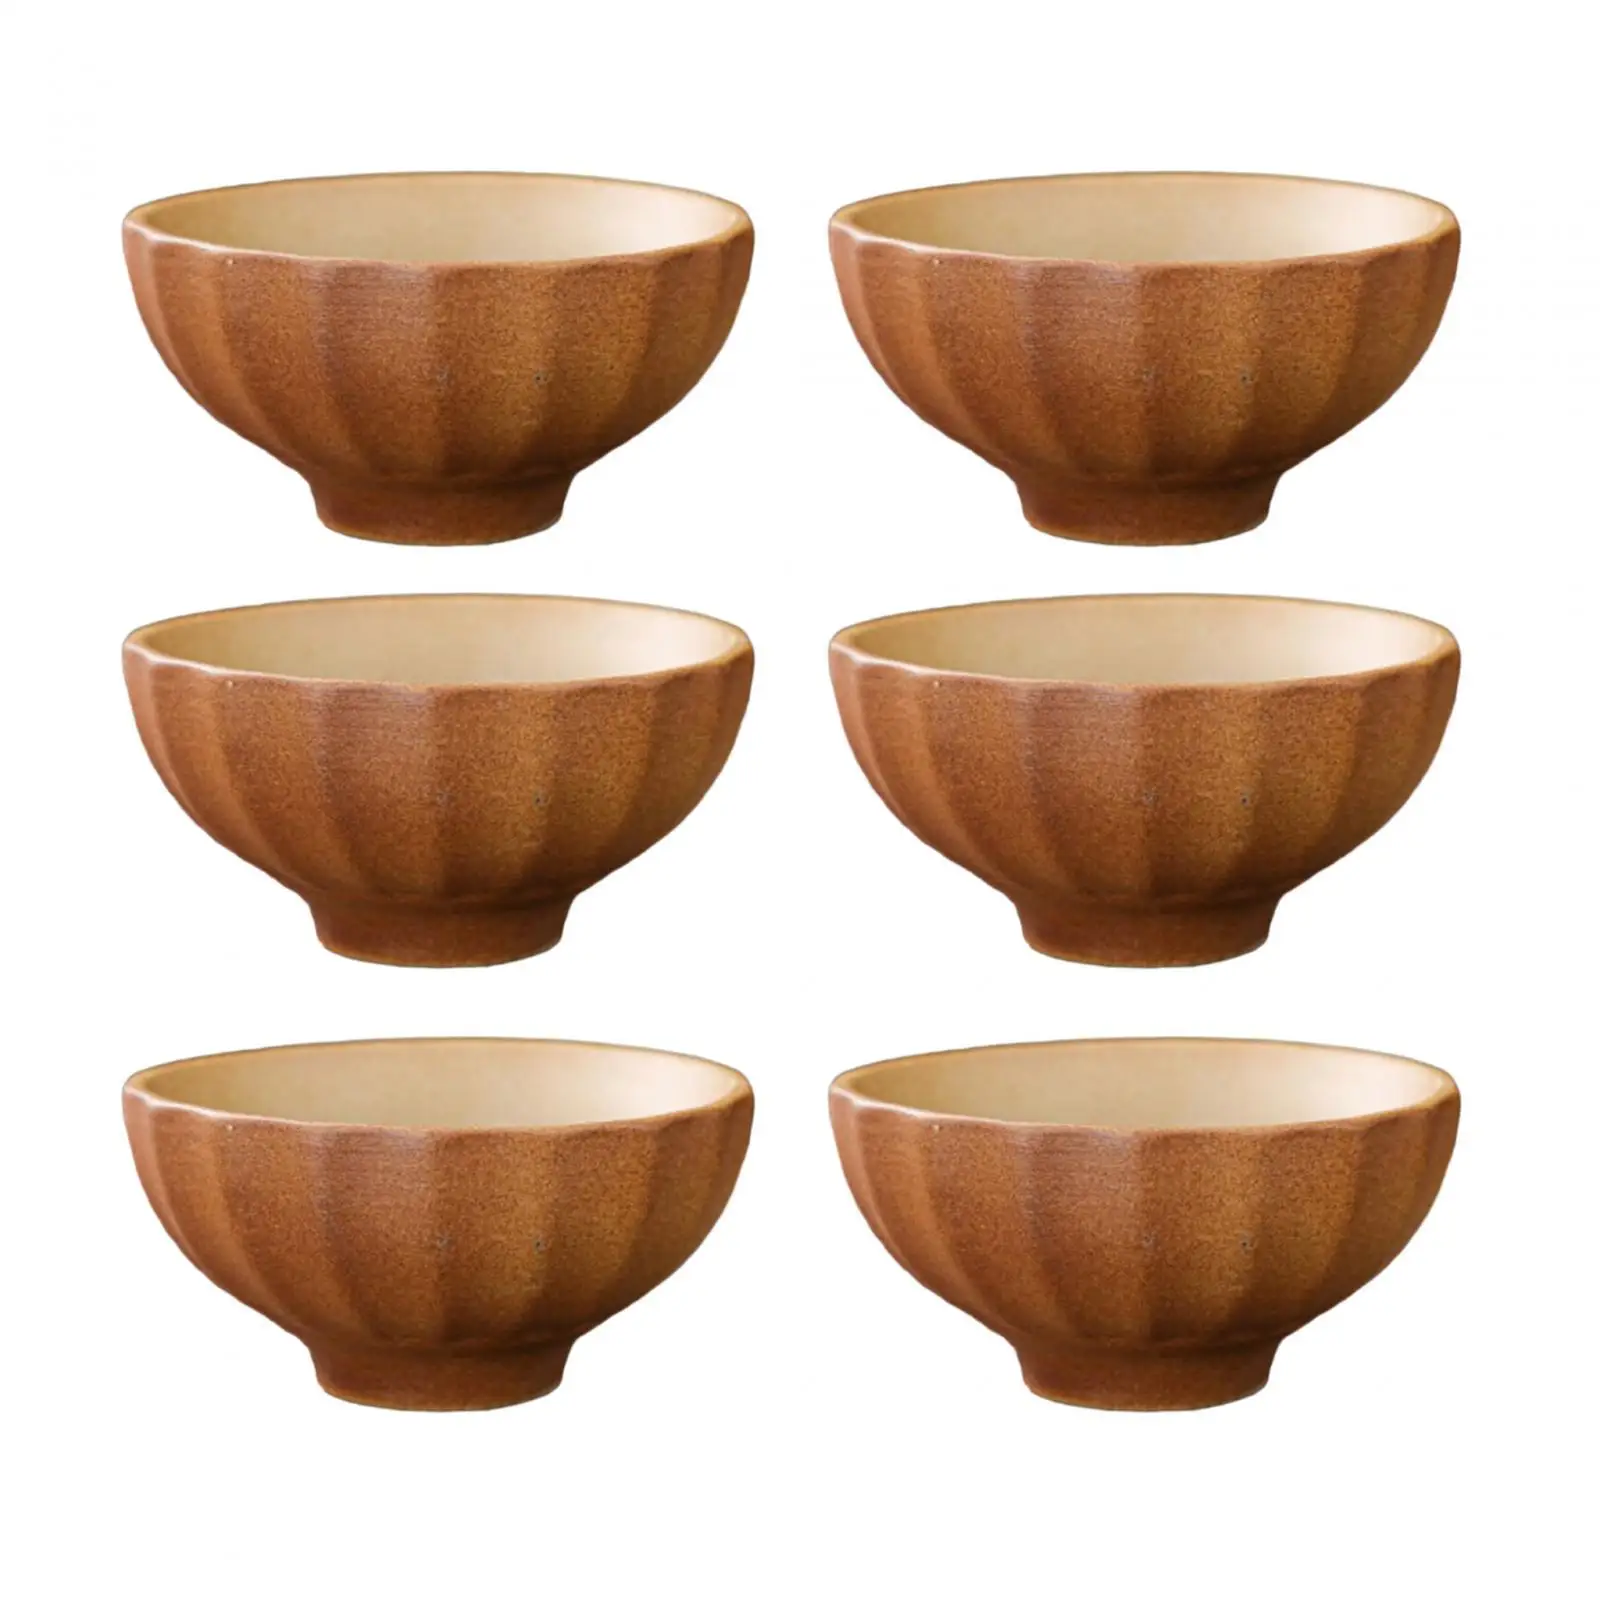 6x Japanese Cup Set Multipurpose Portable Drinkware Japanese Sake Cups for Home Tea Ceremony Party Restaurant Coffee Shop Latte